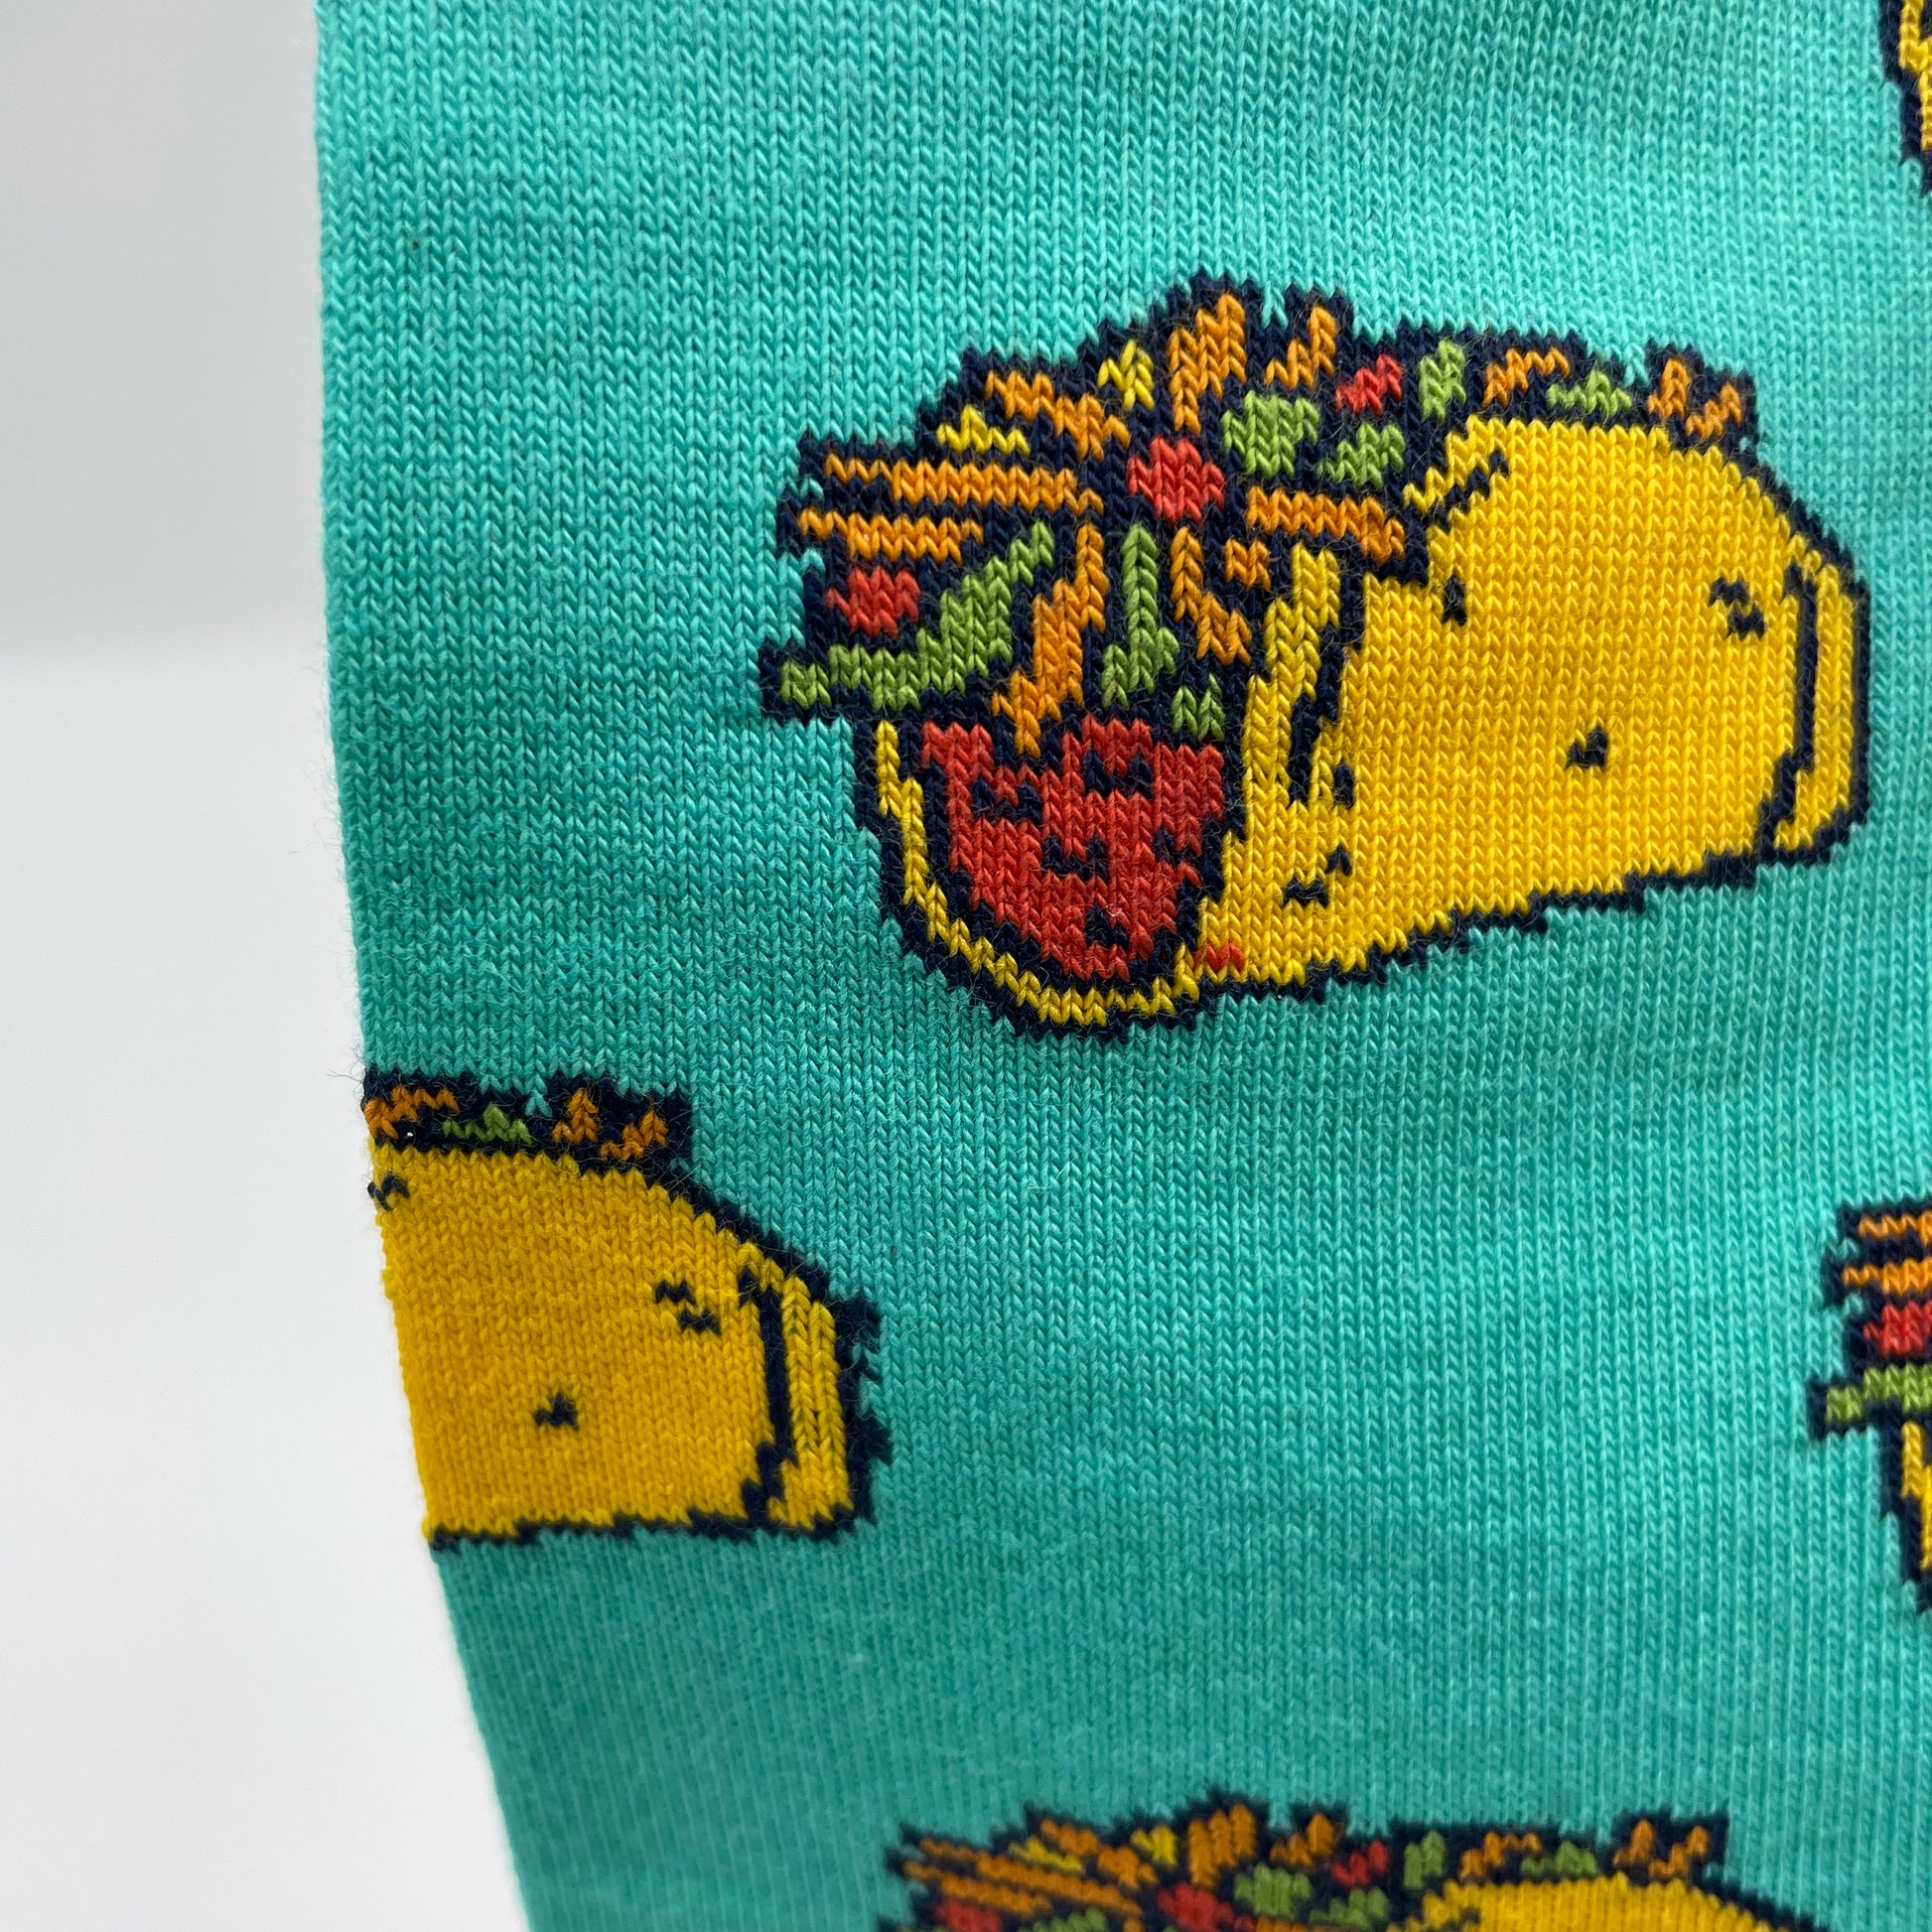 A close-up photo shows detail of a taco pattern woven into turquoise organic cotton socks.